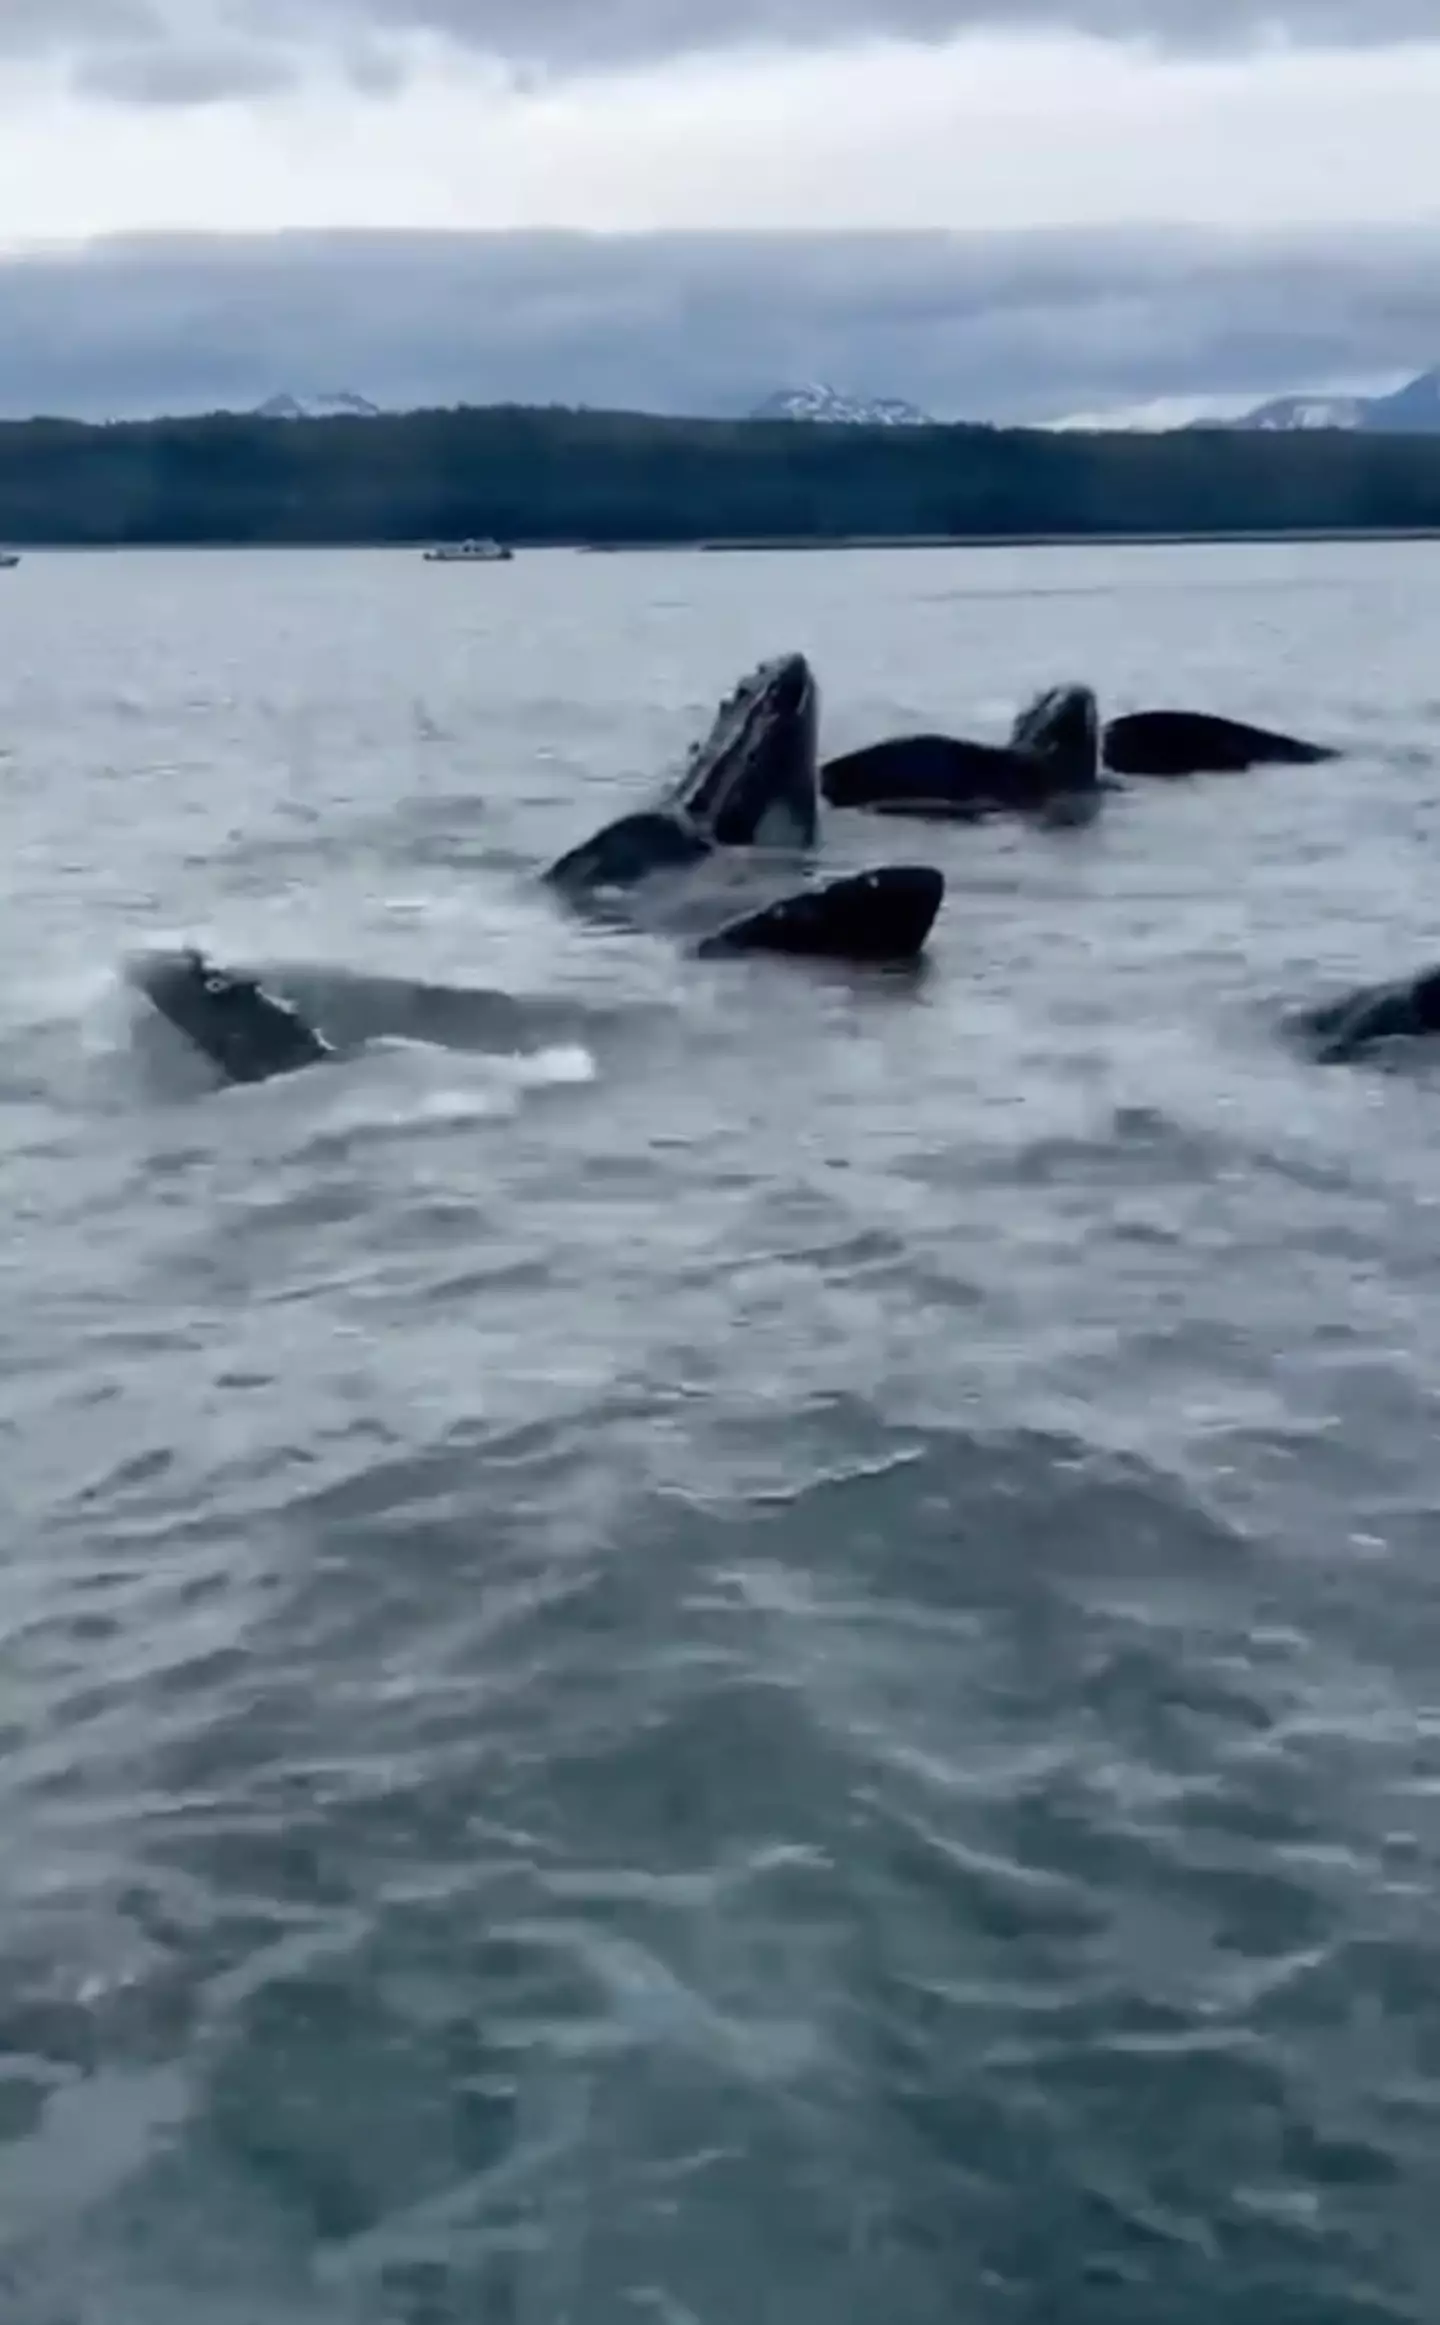 Cruise passengers could be heard ‘freaking out’ as the whales breached the surface.